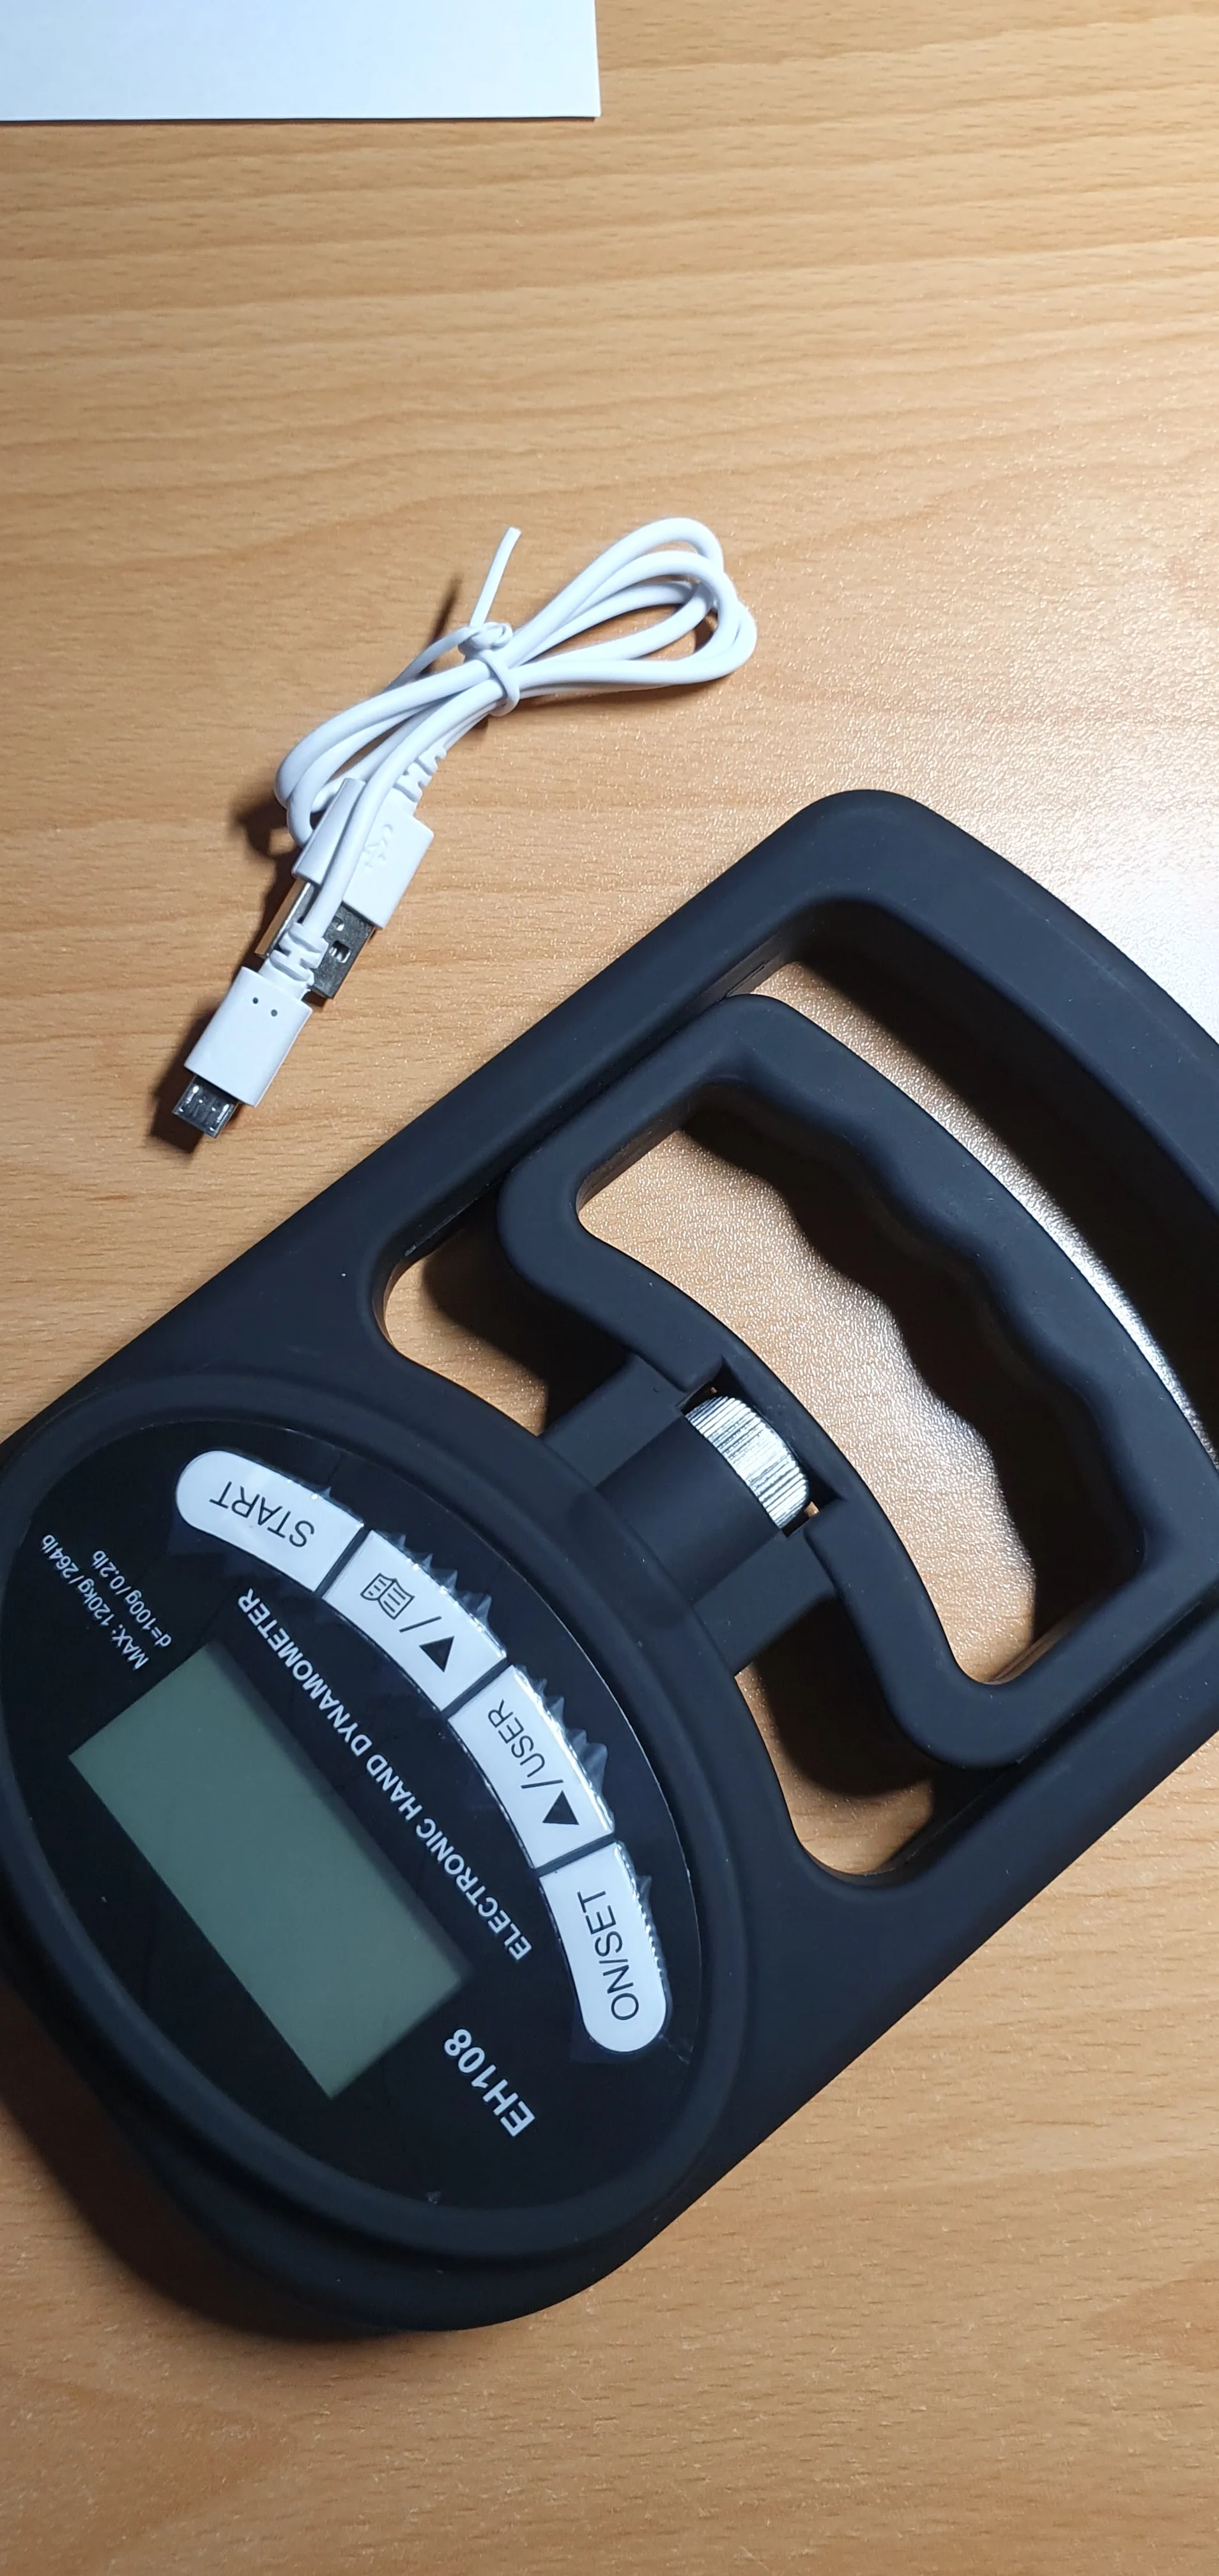 Grip Strength Tester 265Lbs/120Kg Digital Hand Dynamometer photo review